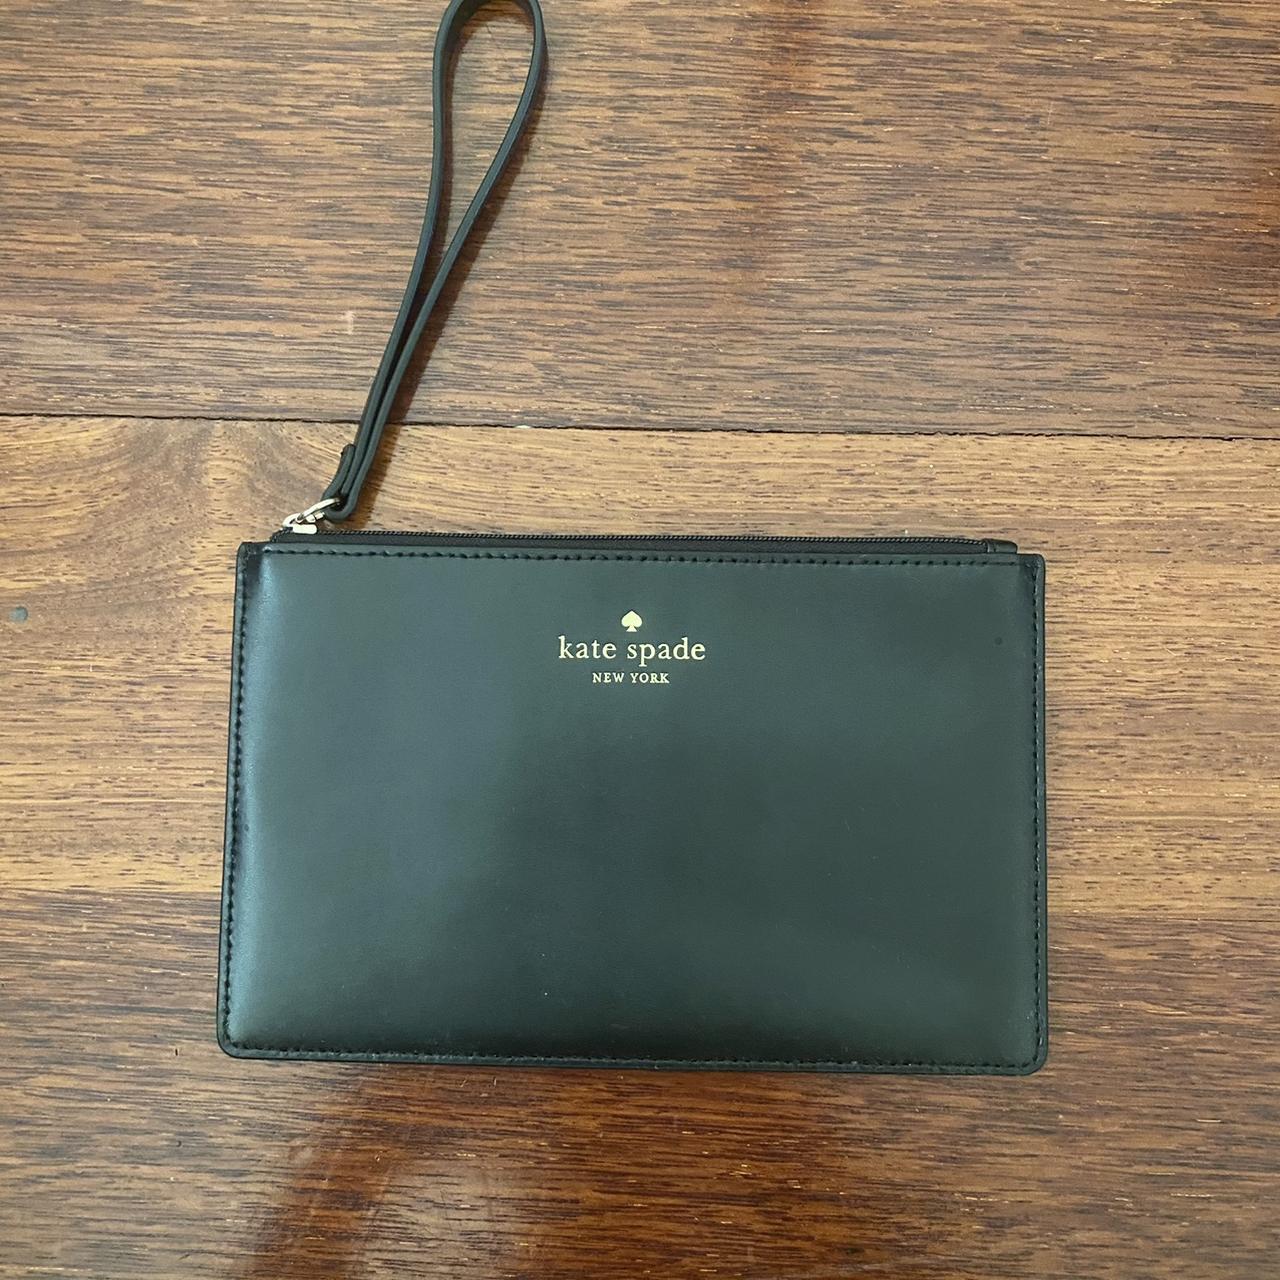 kate spade black pouch , brand new with tags inside